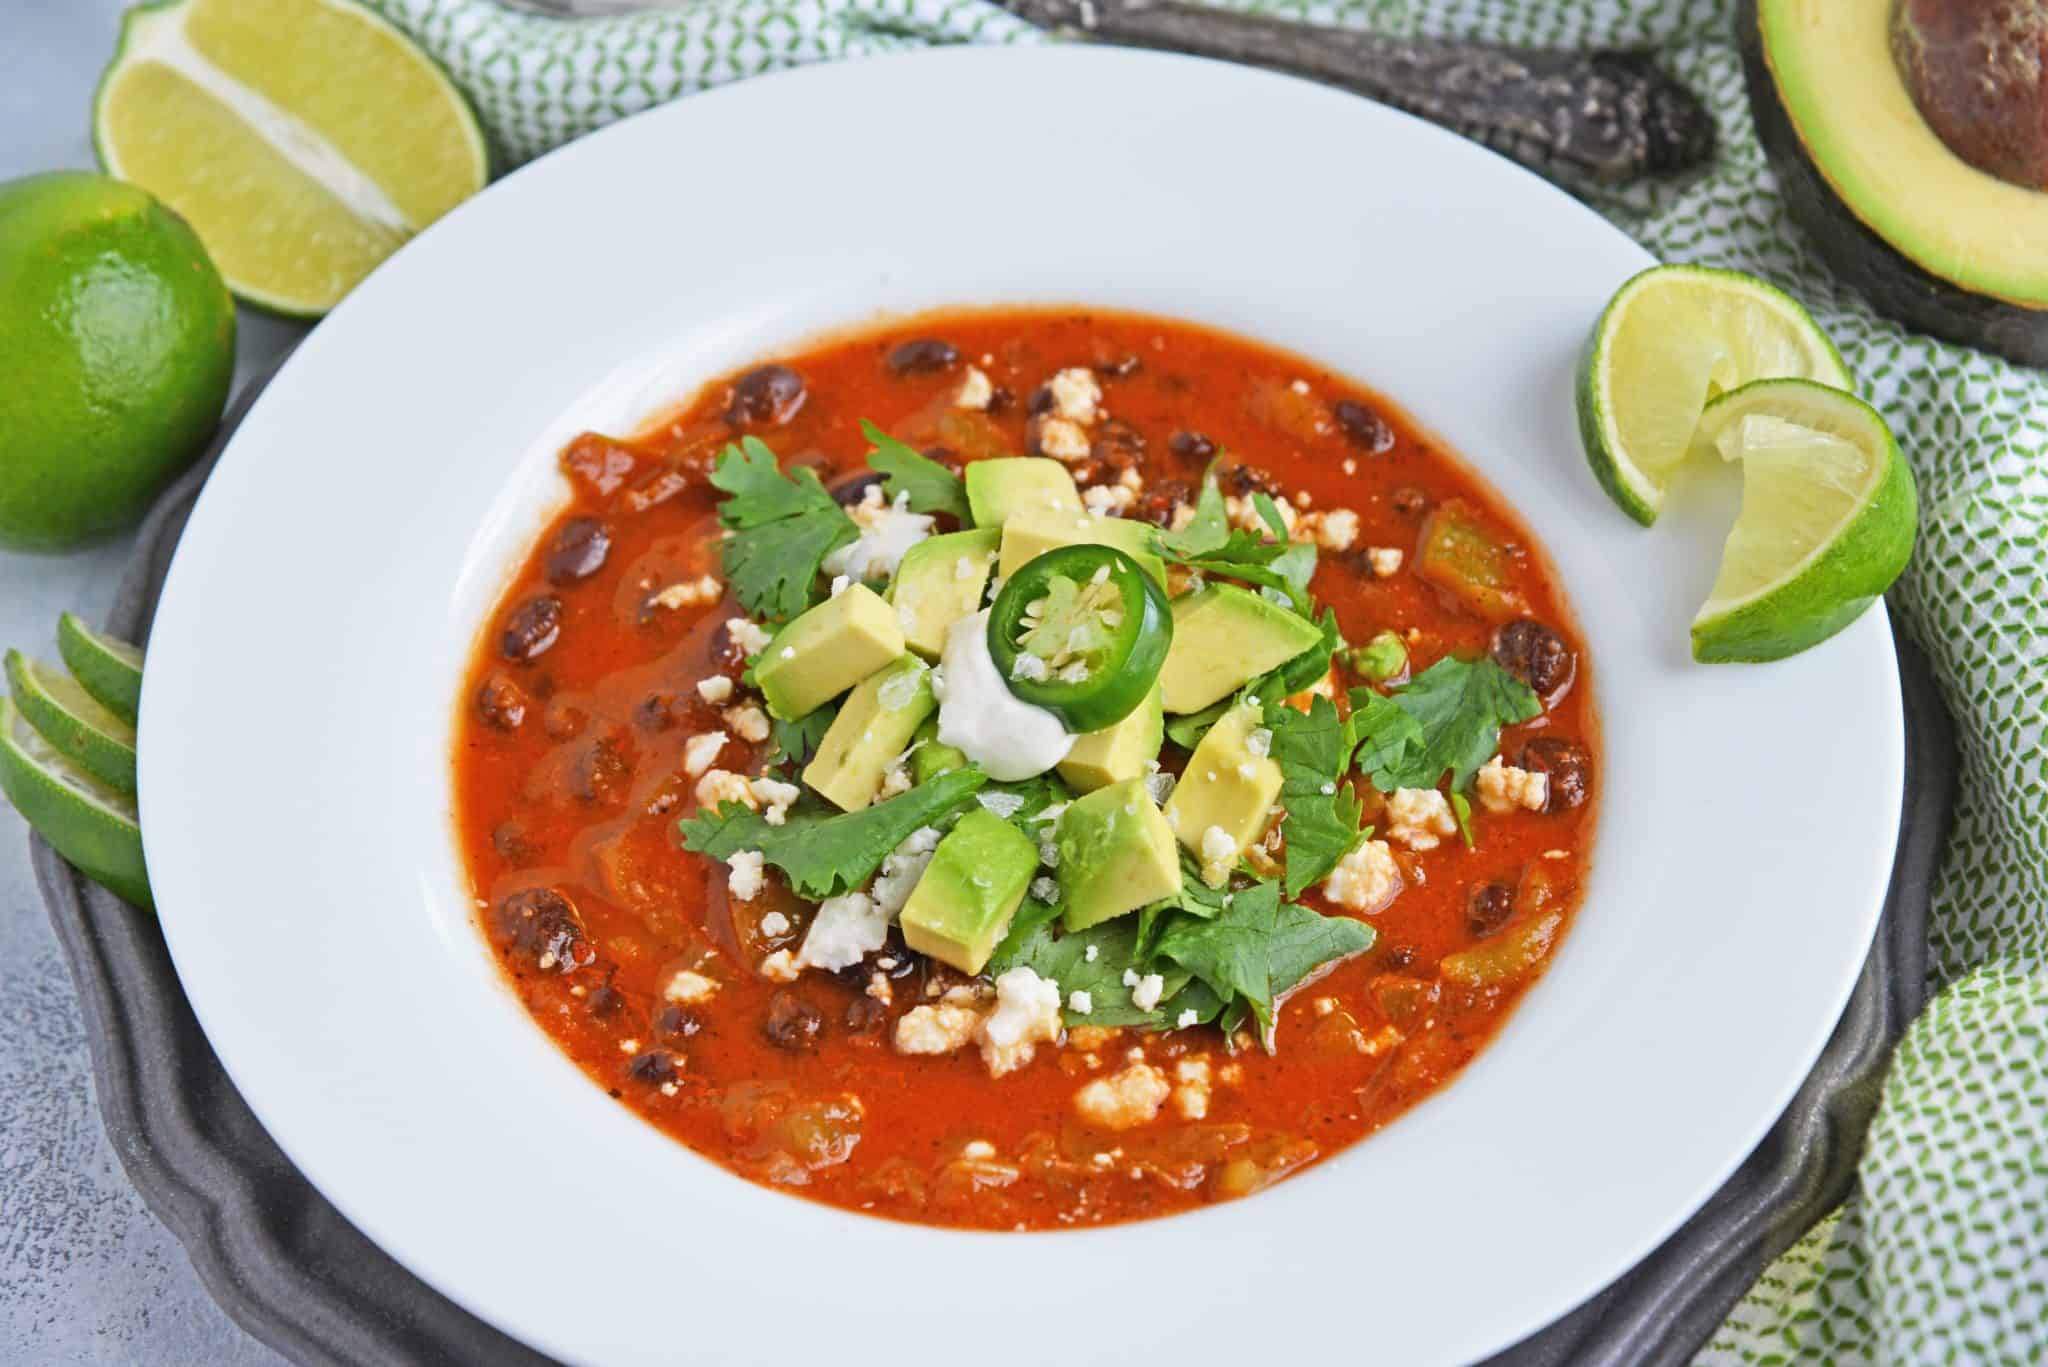 Black bean green chile soup is a tomato based soup with smoky chipotle peppers and robust flavors. Top with avocado, cilantro and queso fresco! #easysoups #souprecipes www.savoryexperiments.com